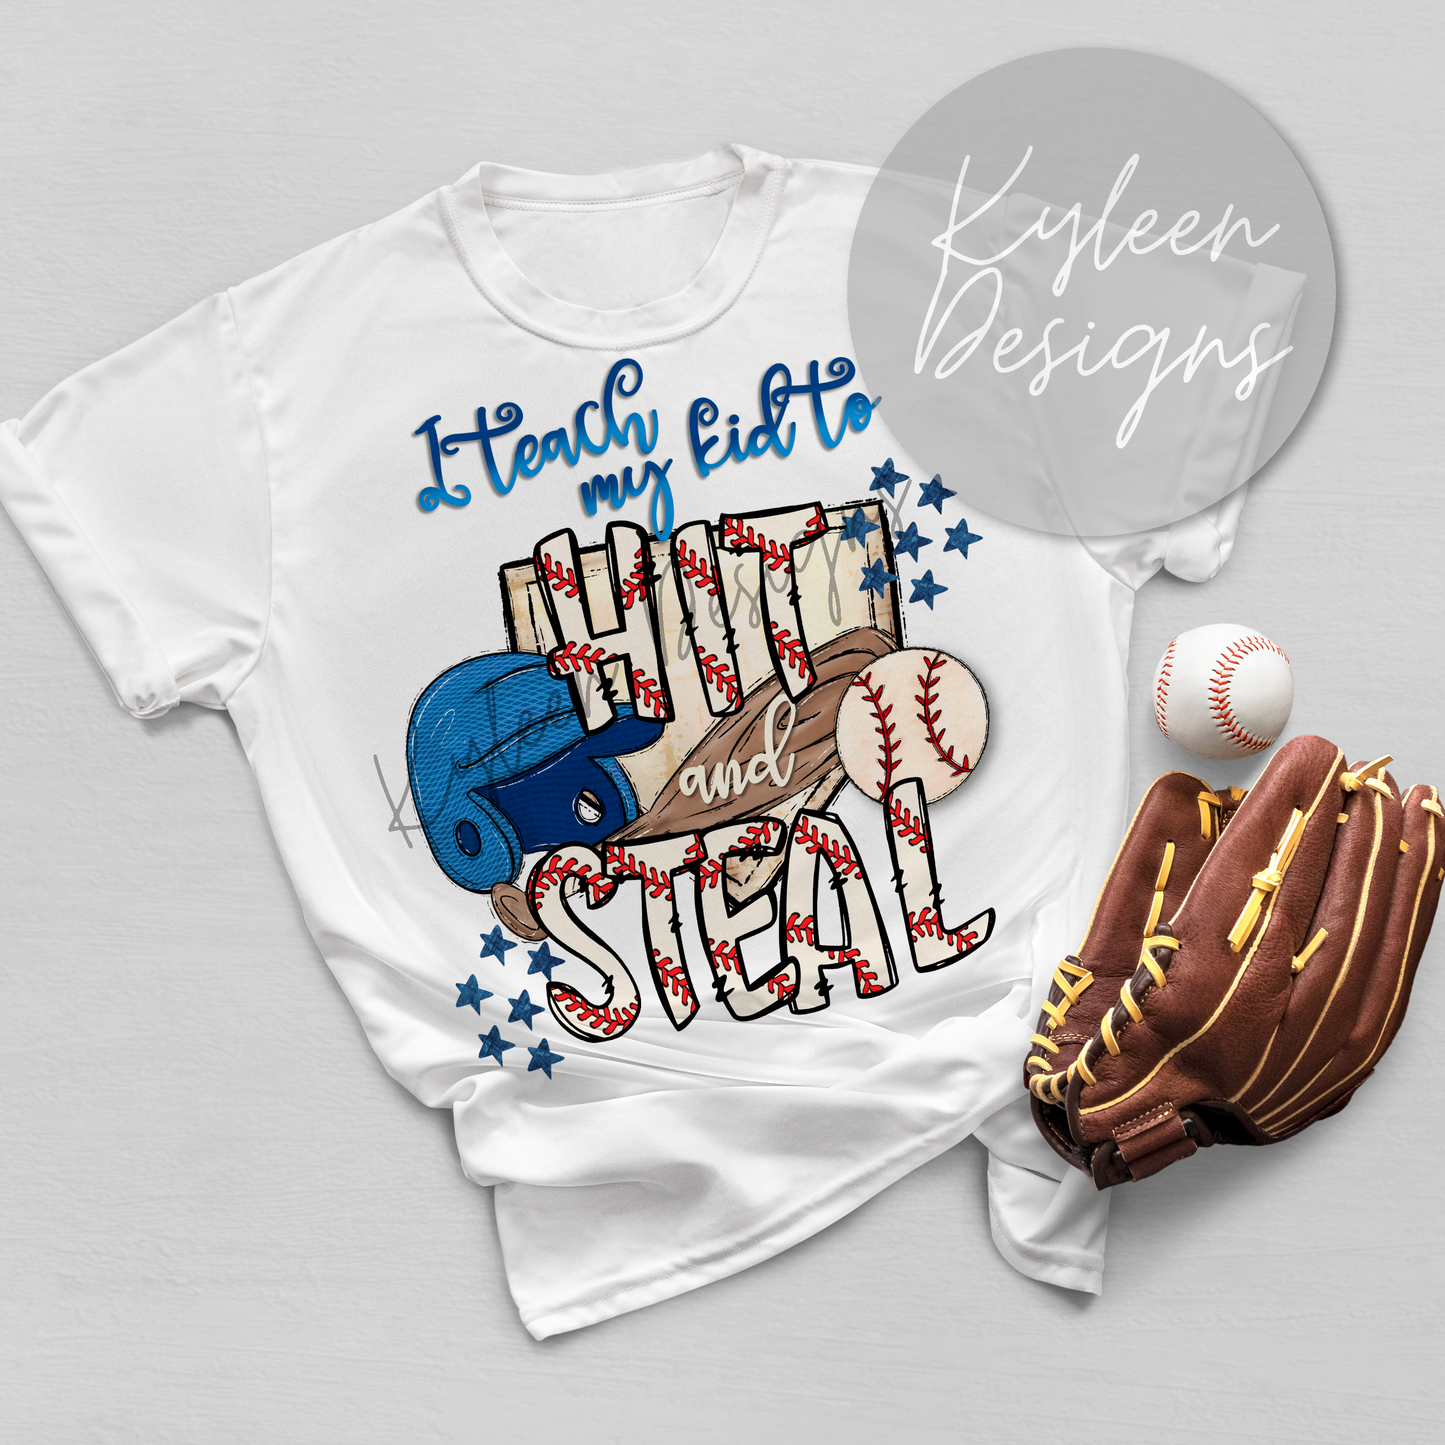 I teach my kid to hit and steal T-shirt